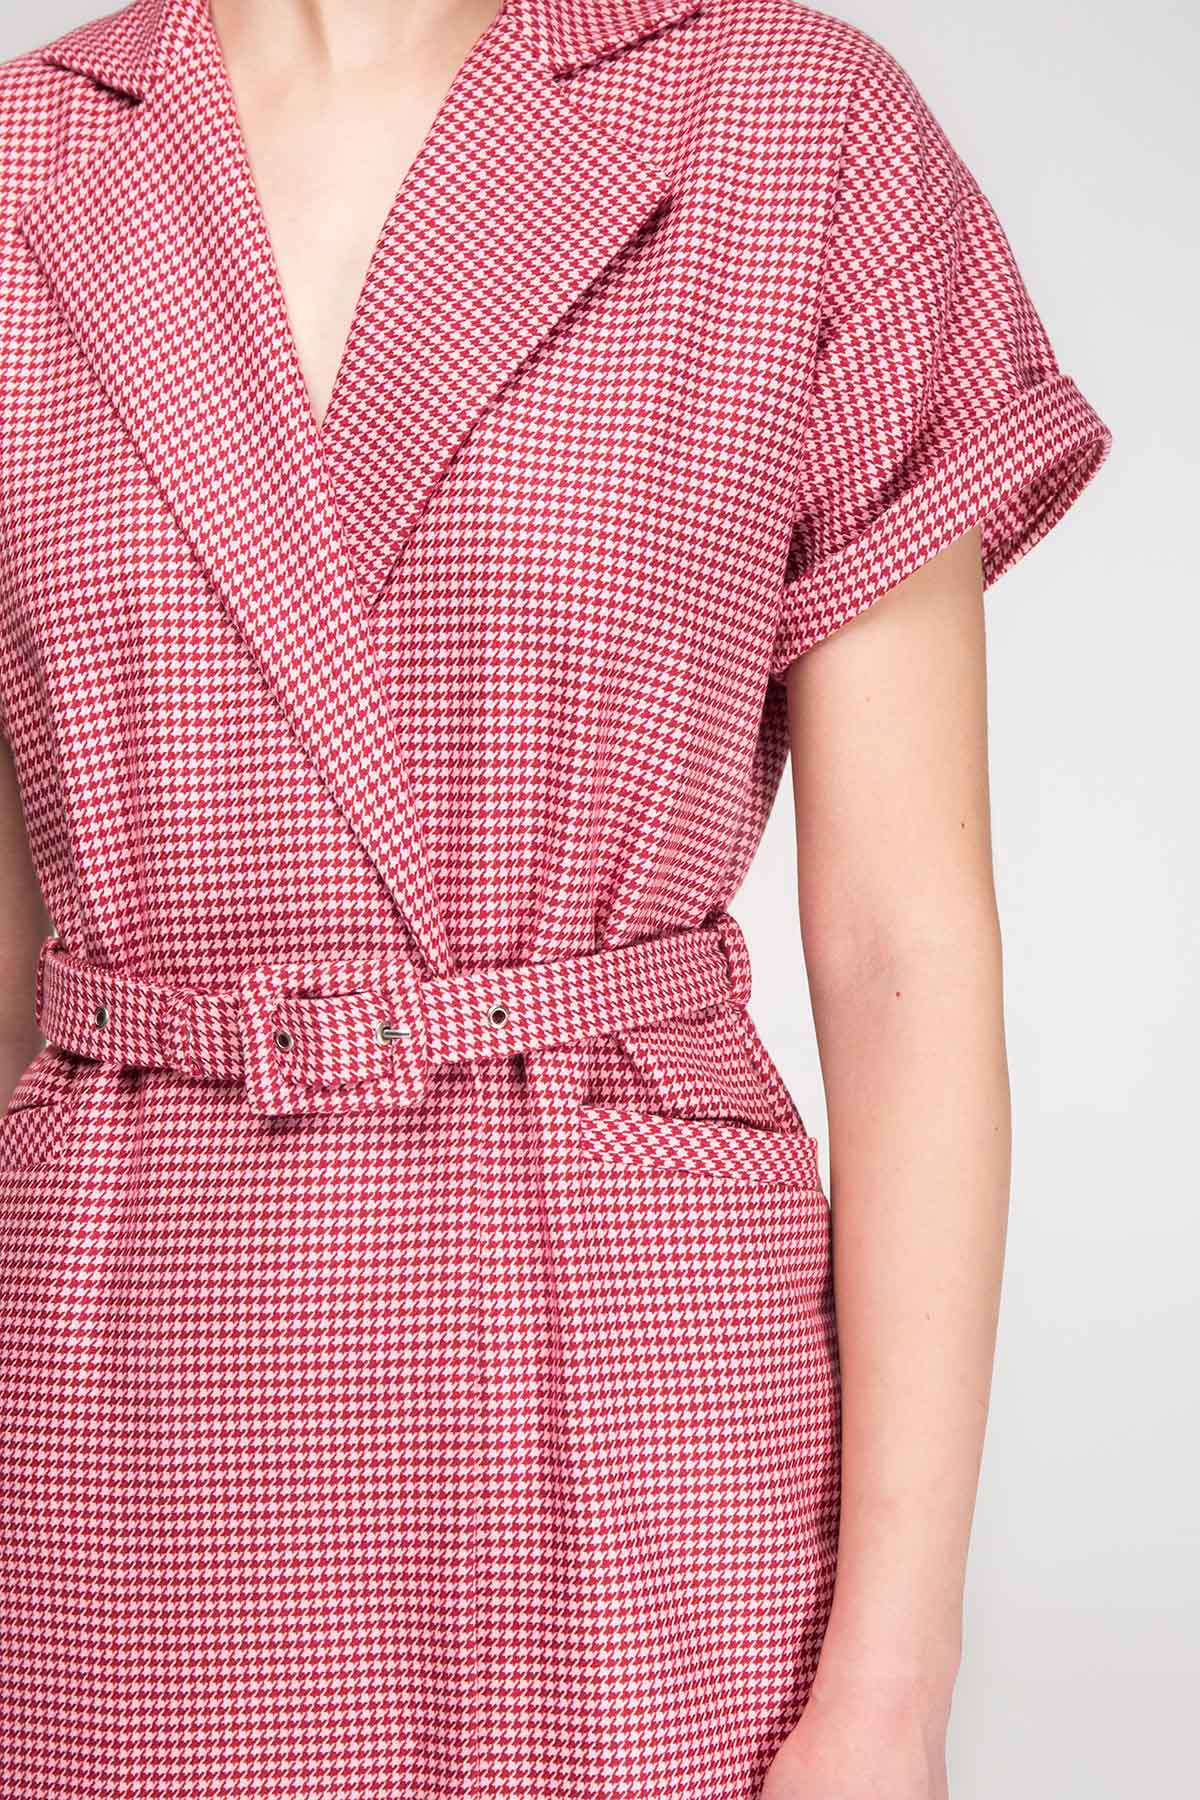 Pink-red houndstooth wrap dress with a waist, photo 11